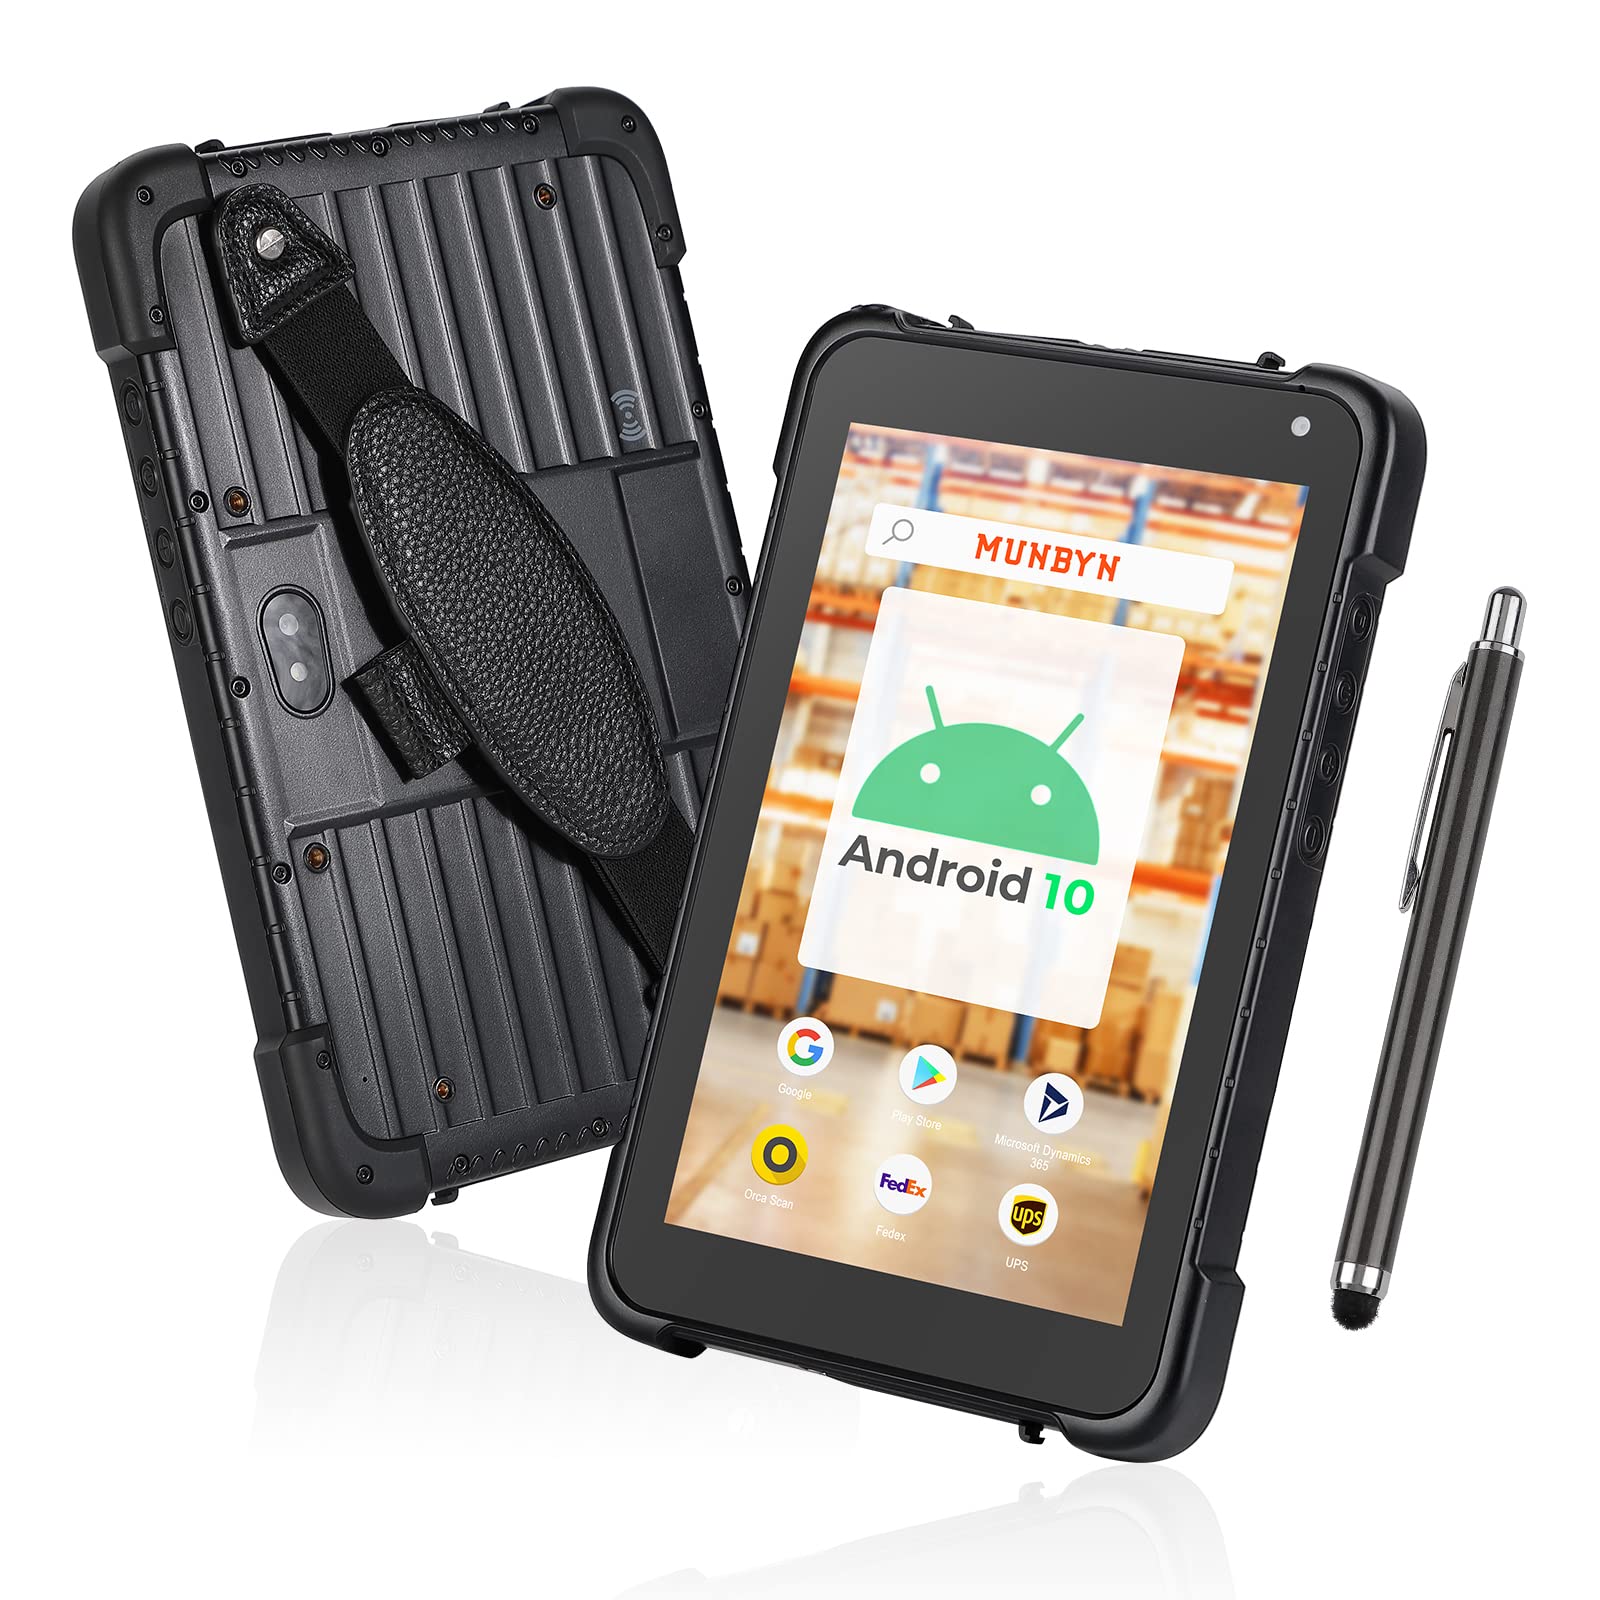 Rugged Android Tablet, 8